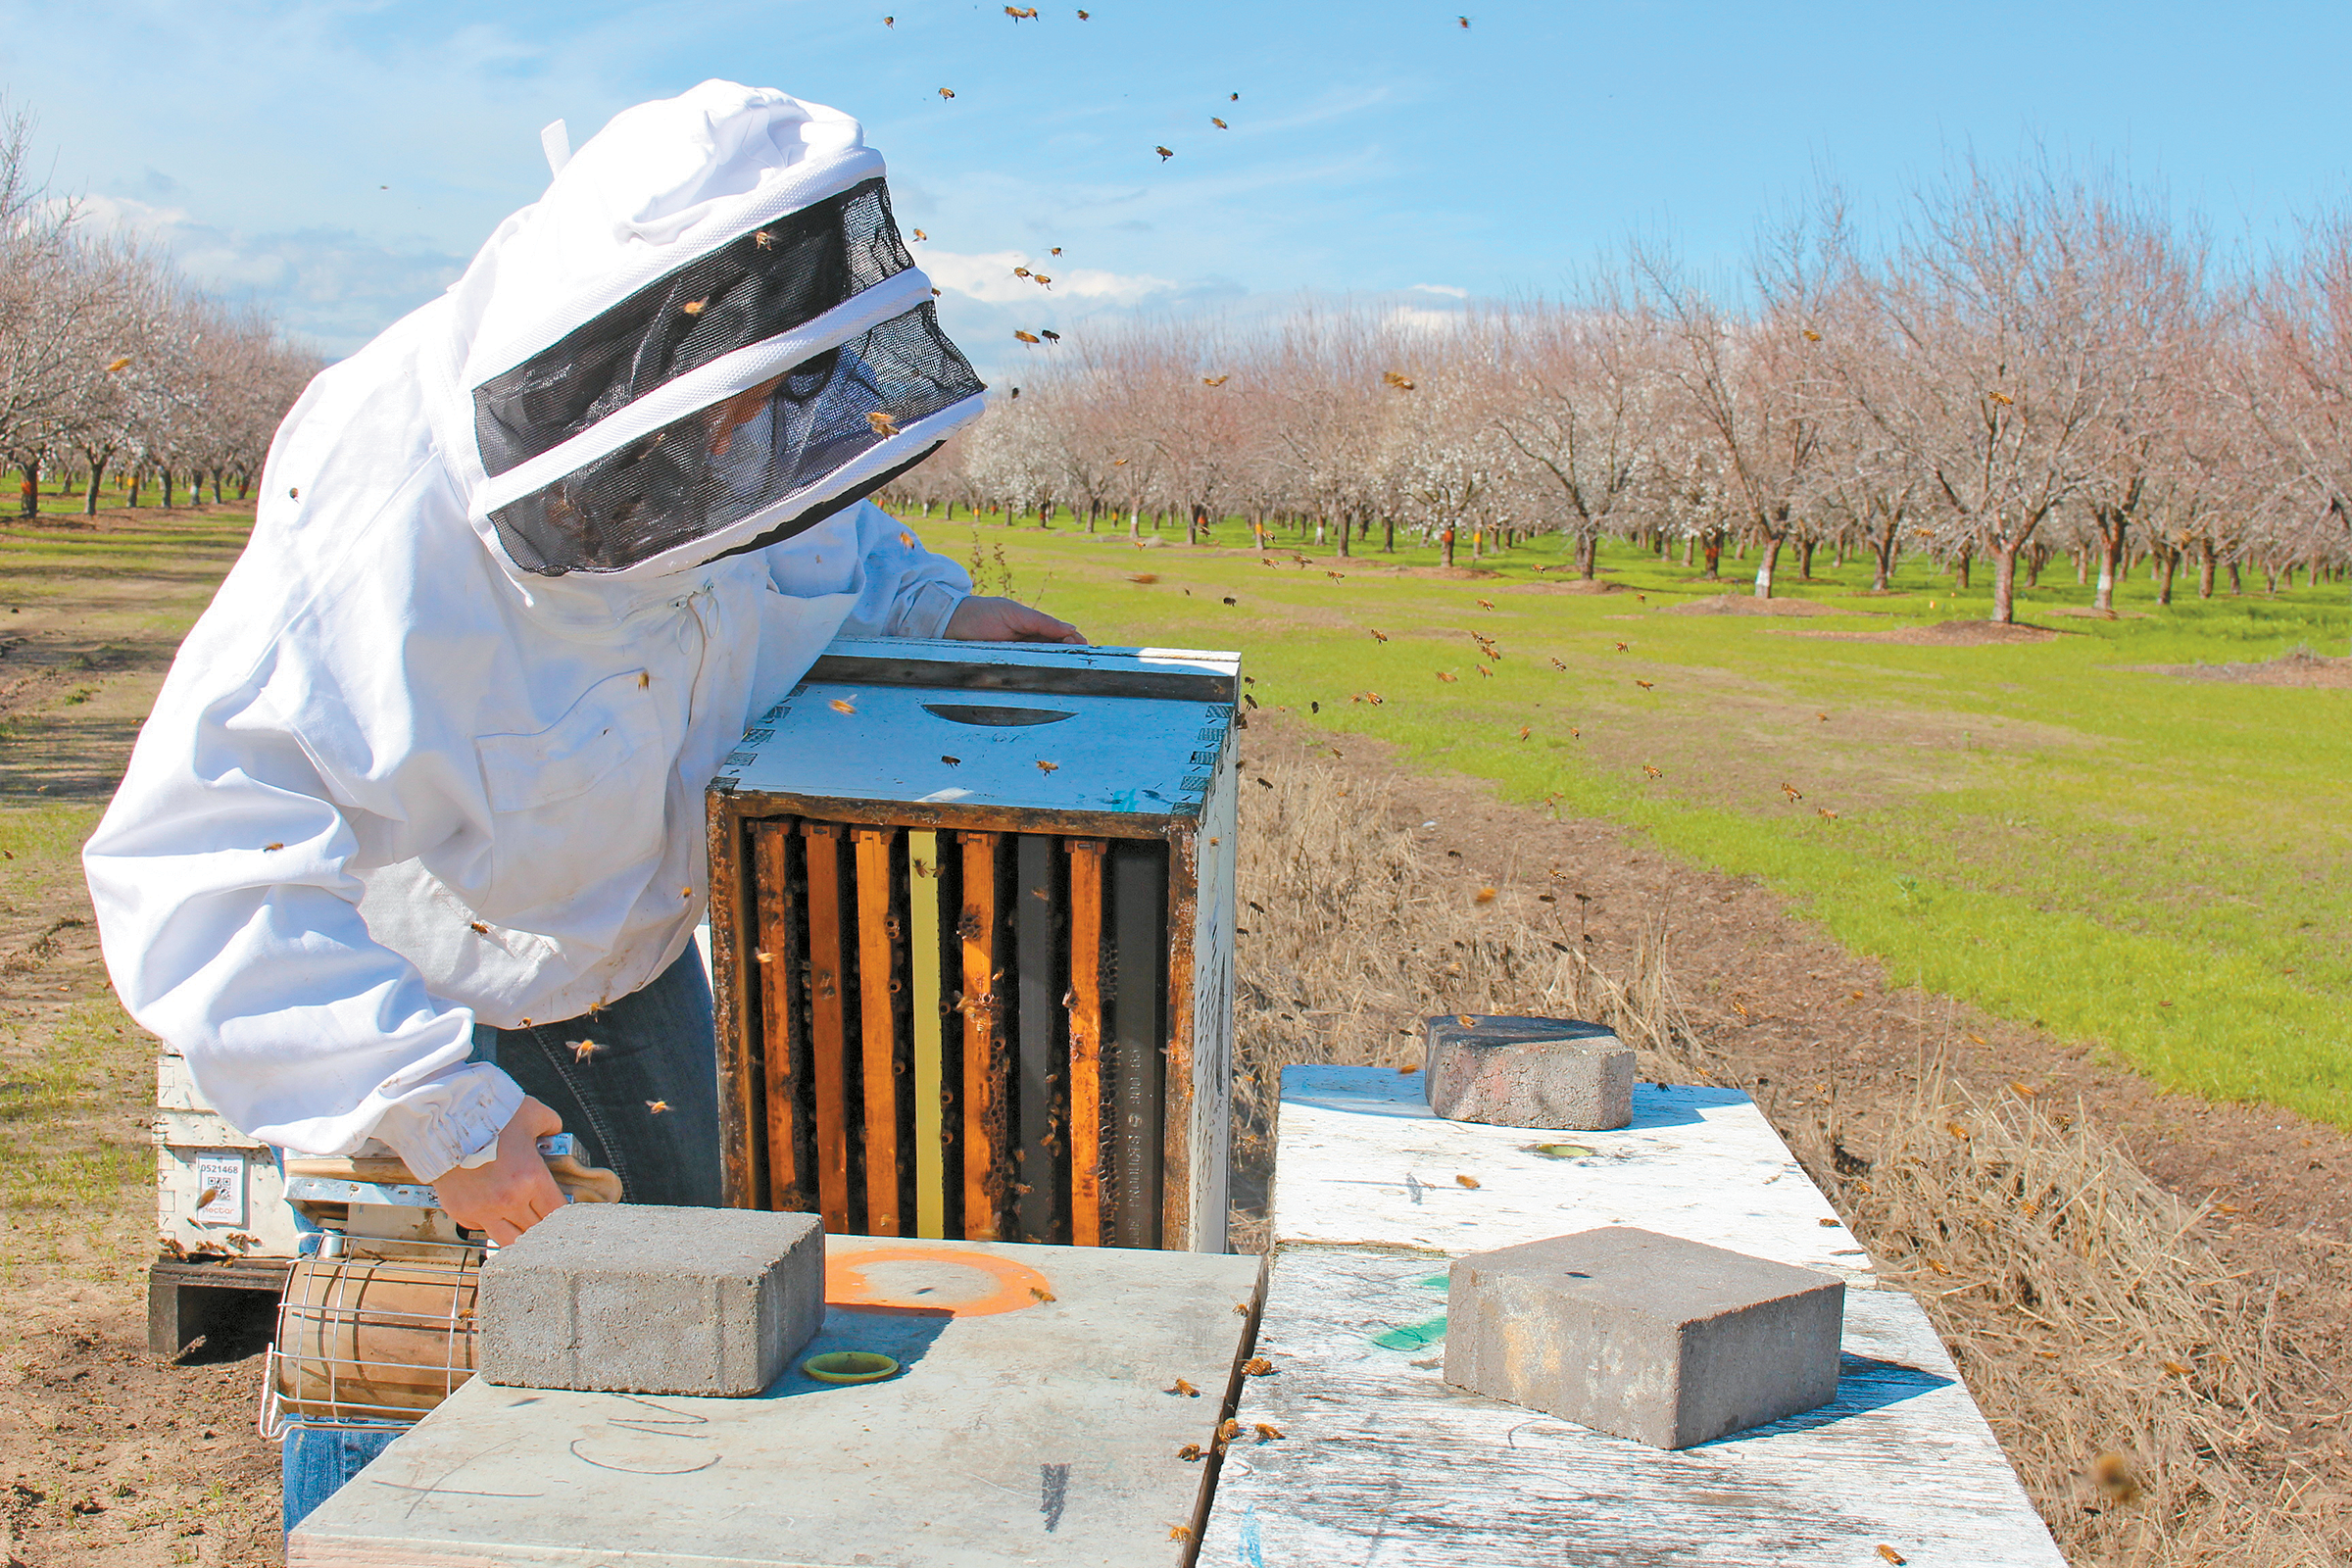 Bees take flight to pollinate almond crop